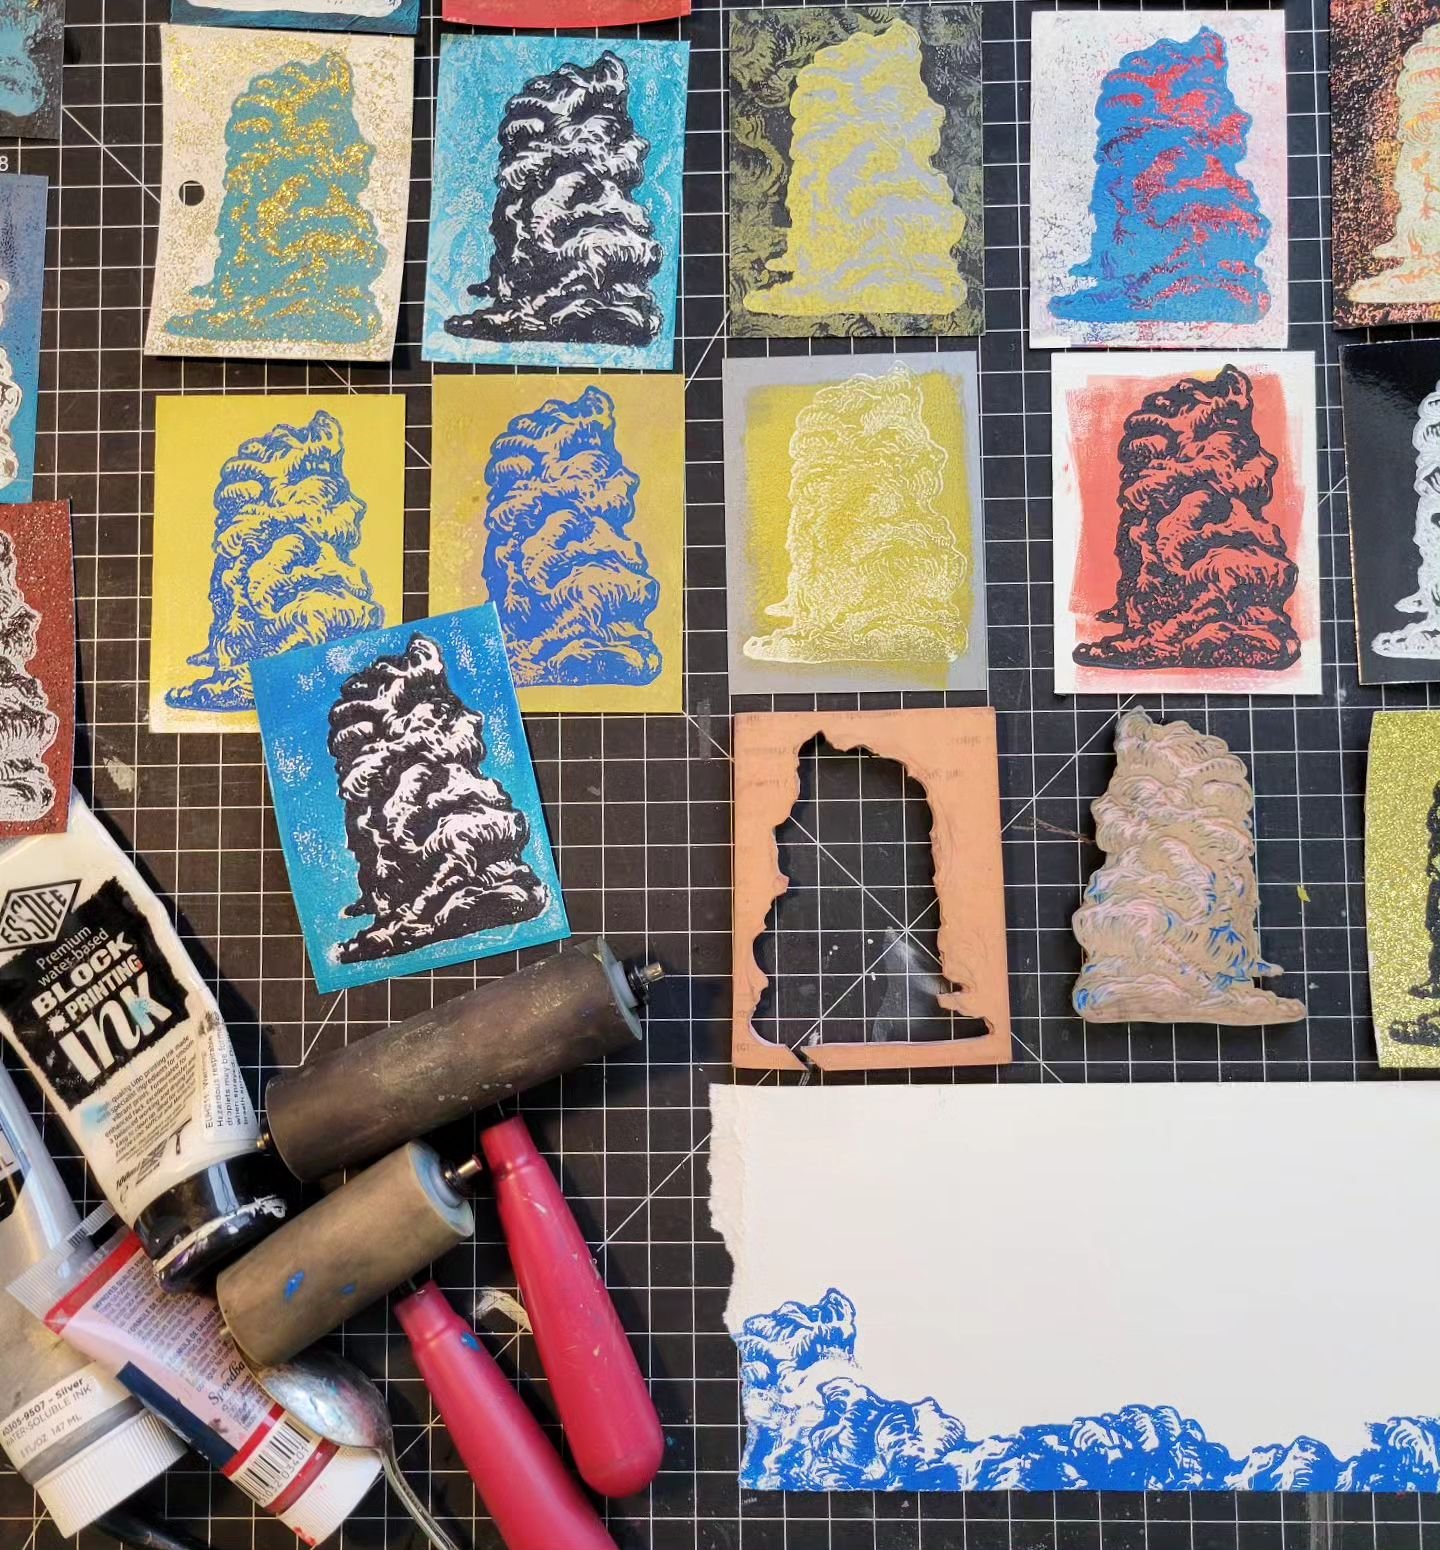 I really like this &quot;trading card&quot; #PrintMaking project we do at @renschool. I love that I get to play with #LinoCut and seed these little #cloud variations out in the world. The experimentation possibilities are endless! Colors, textures, p